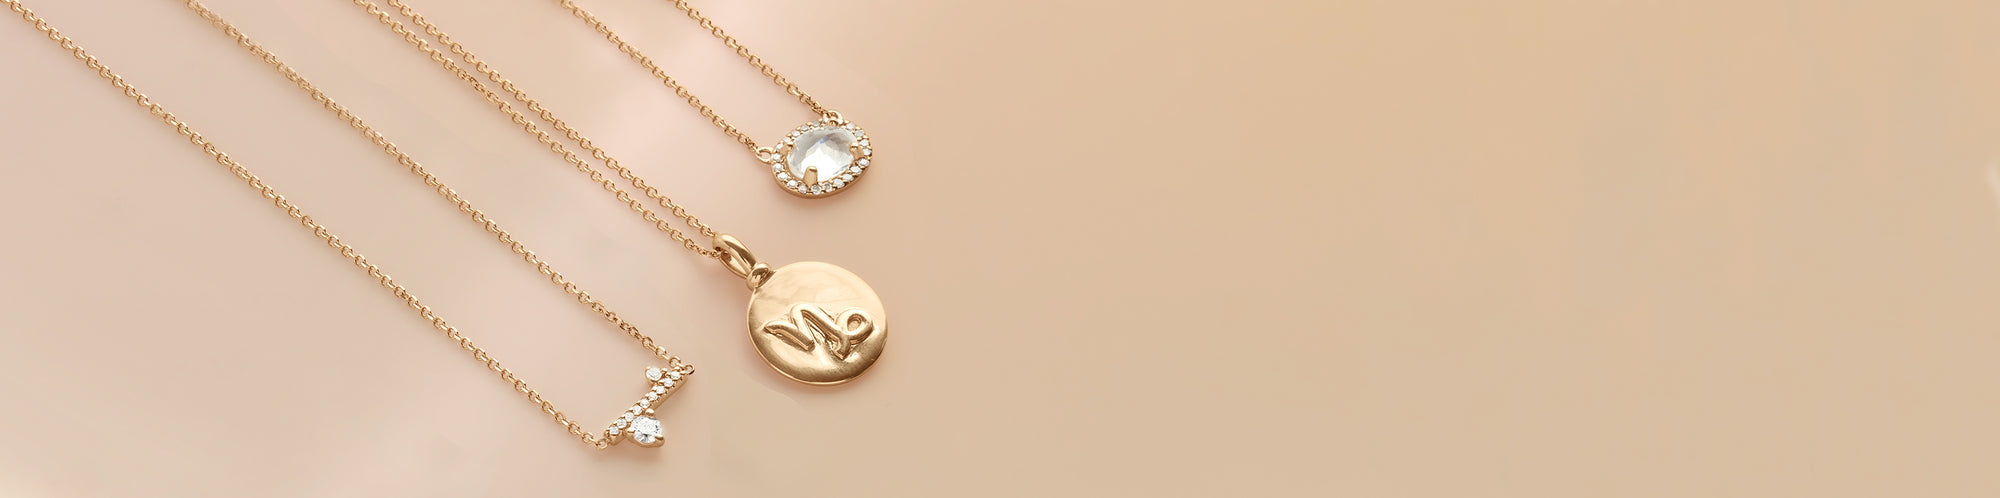 A white diamond necklace, a Capricorn sign necklace, and a rainbow moonstone necklace on a peach colored background.